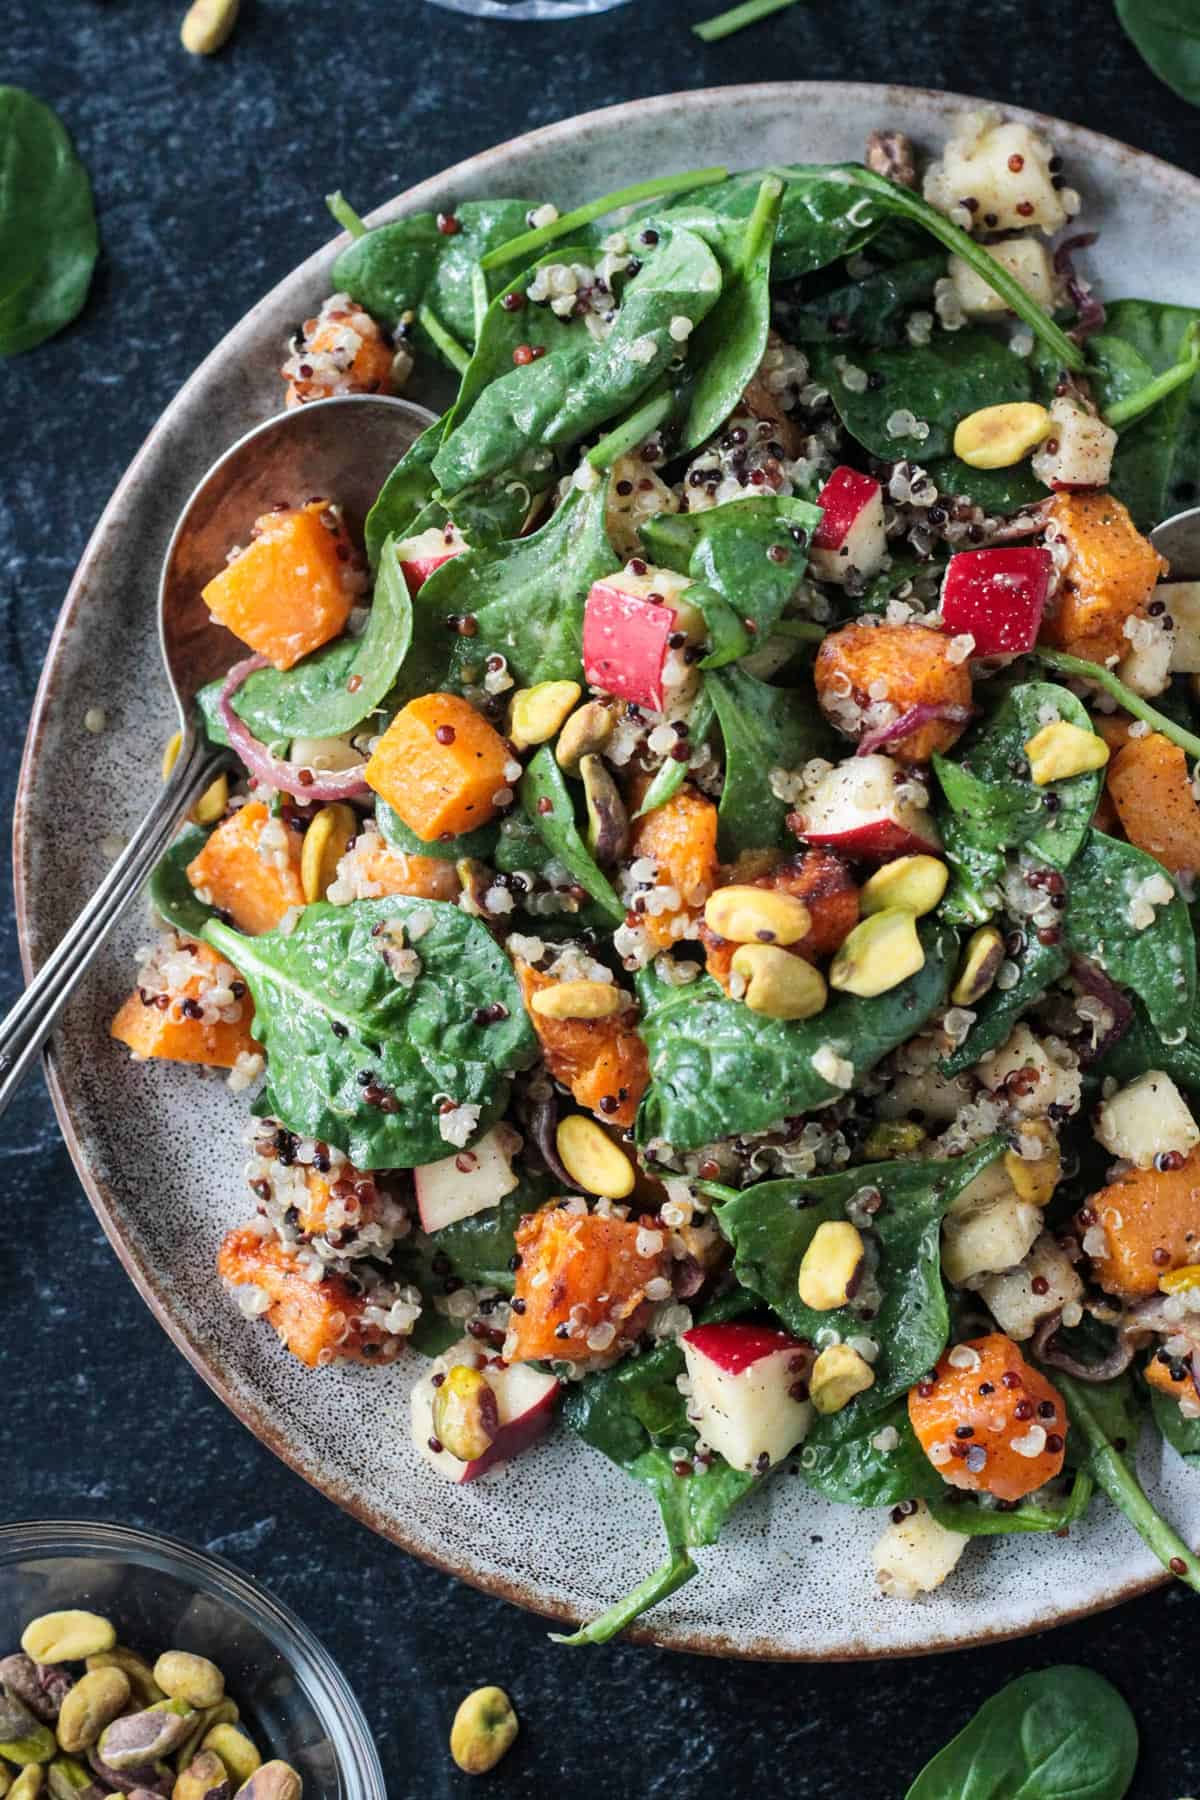 Cubes of roasted butternut squash on plate of baby spinach with quinoa, apples, and pistachios.